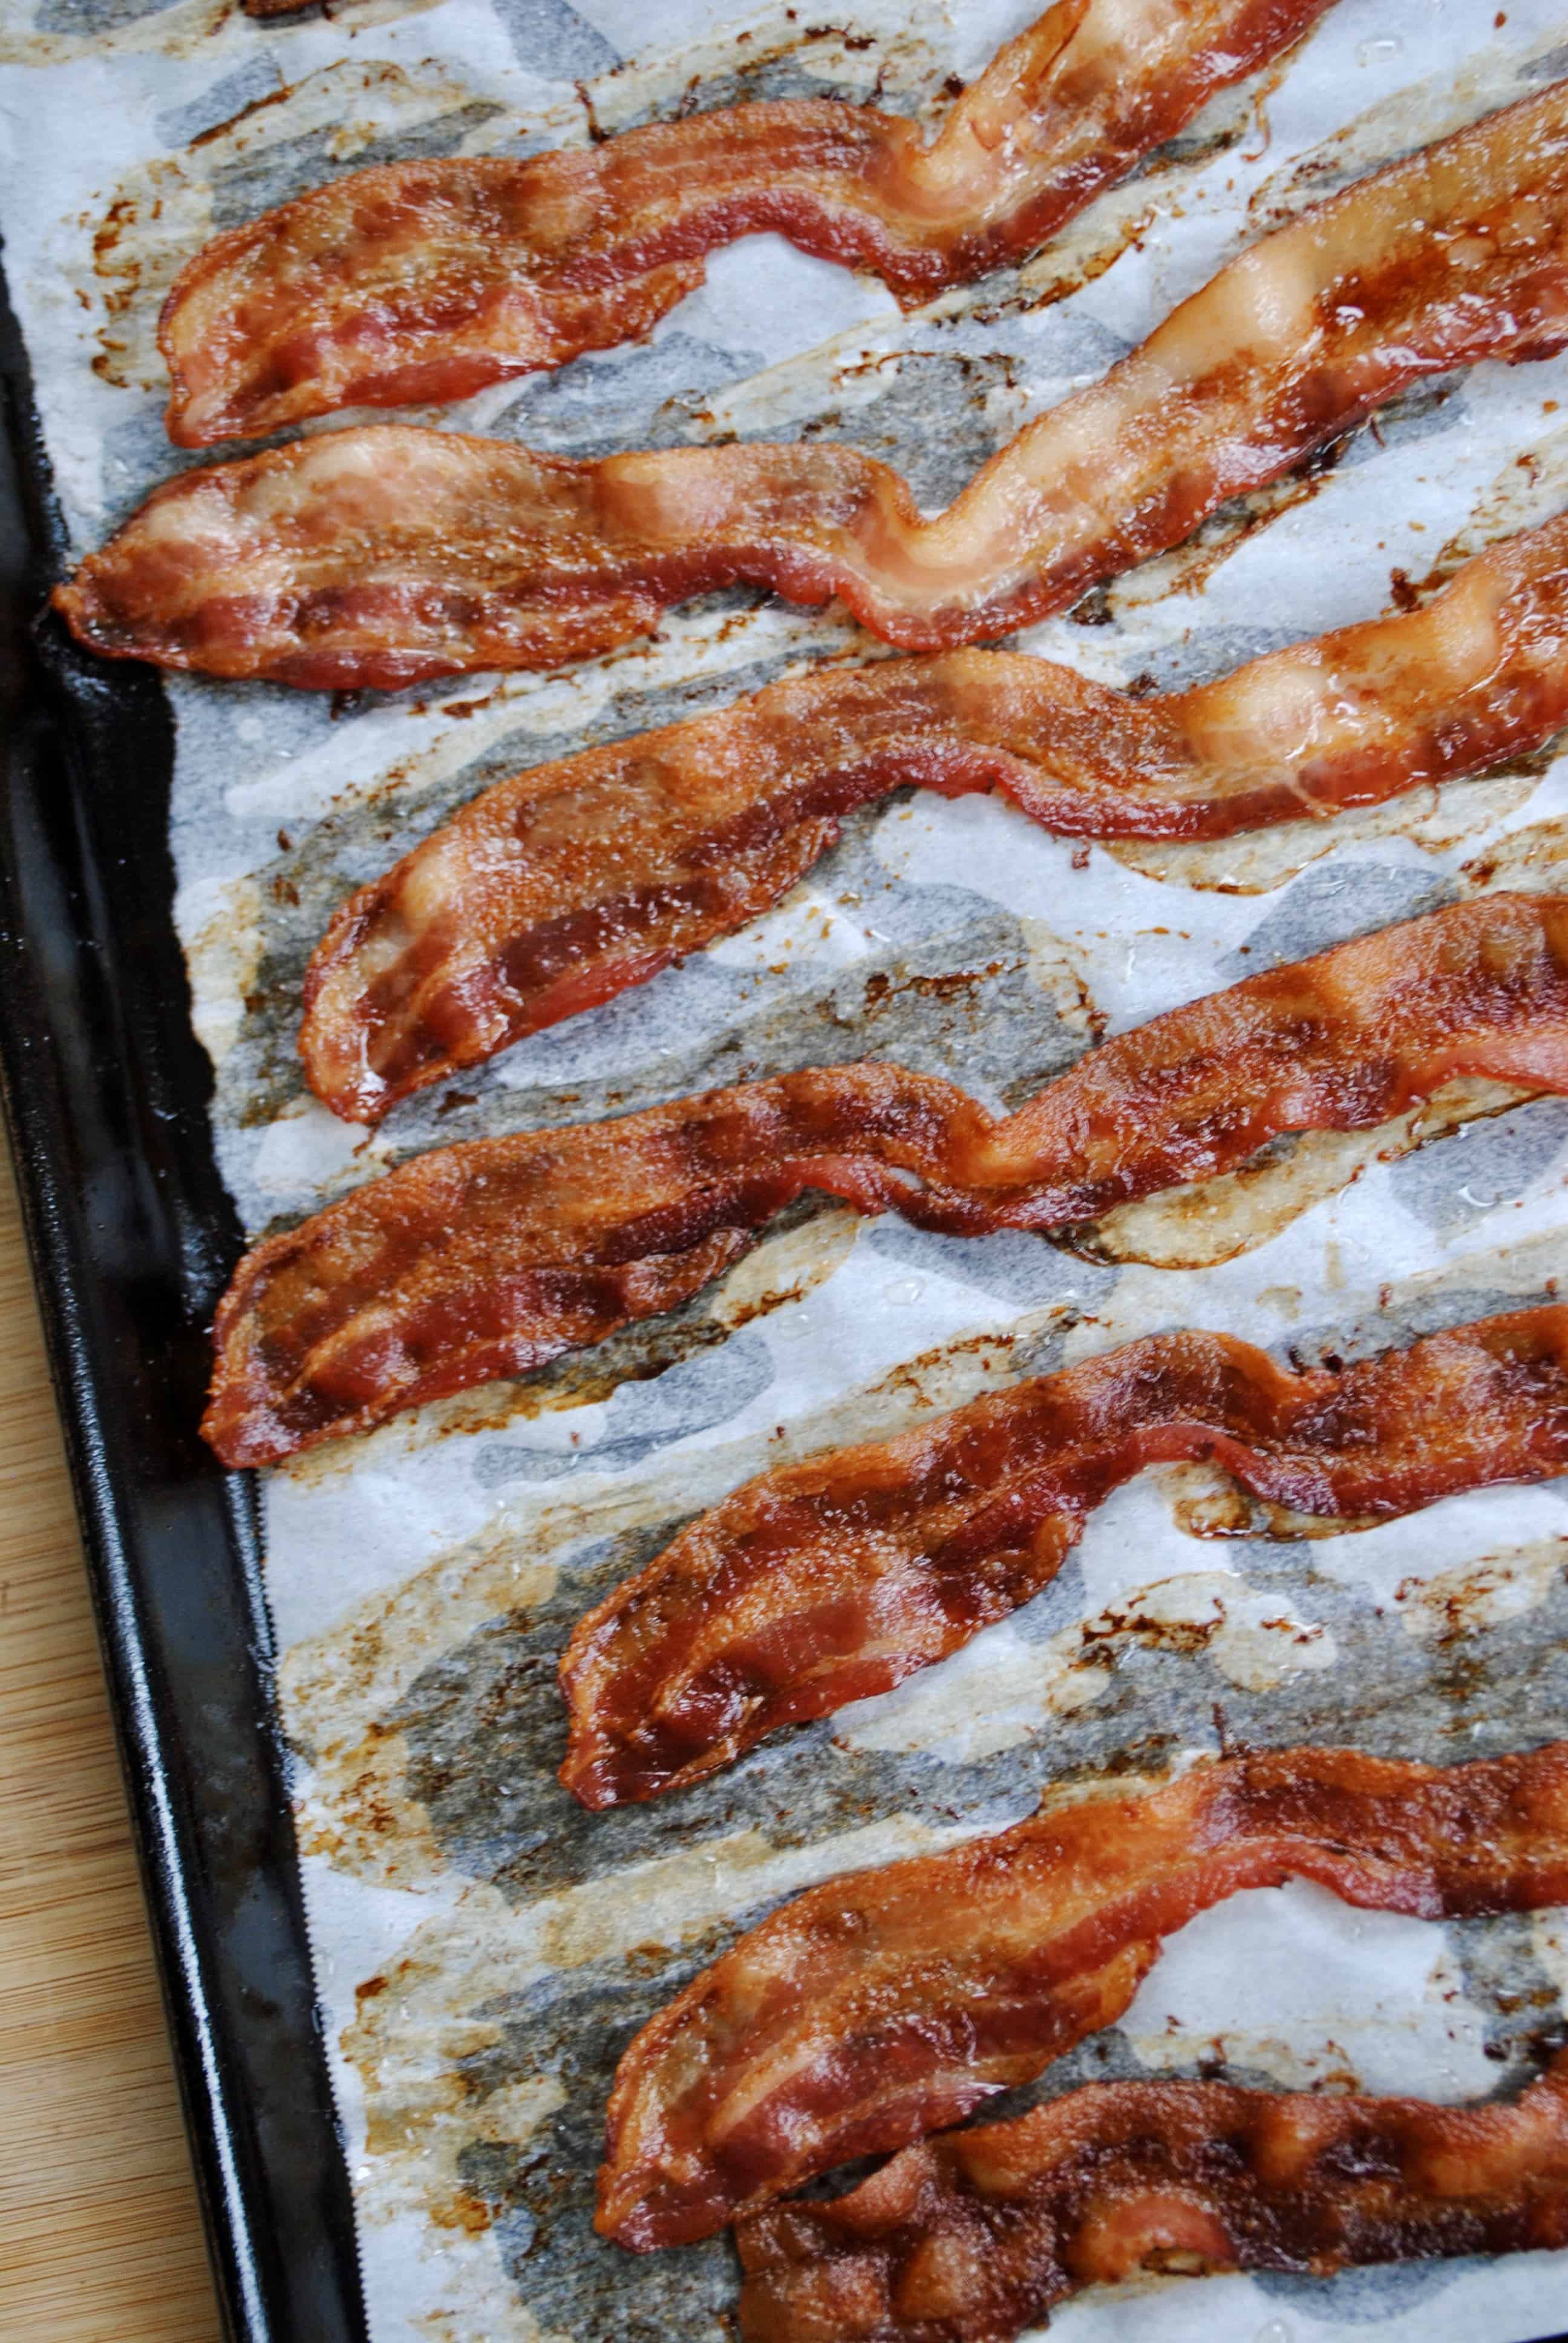 How to cook bacon in the oven.